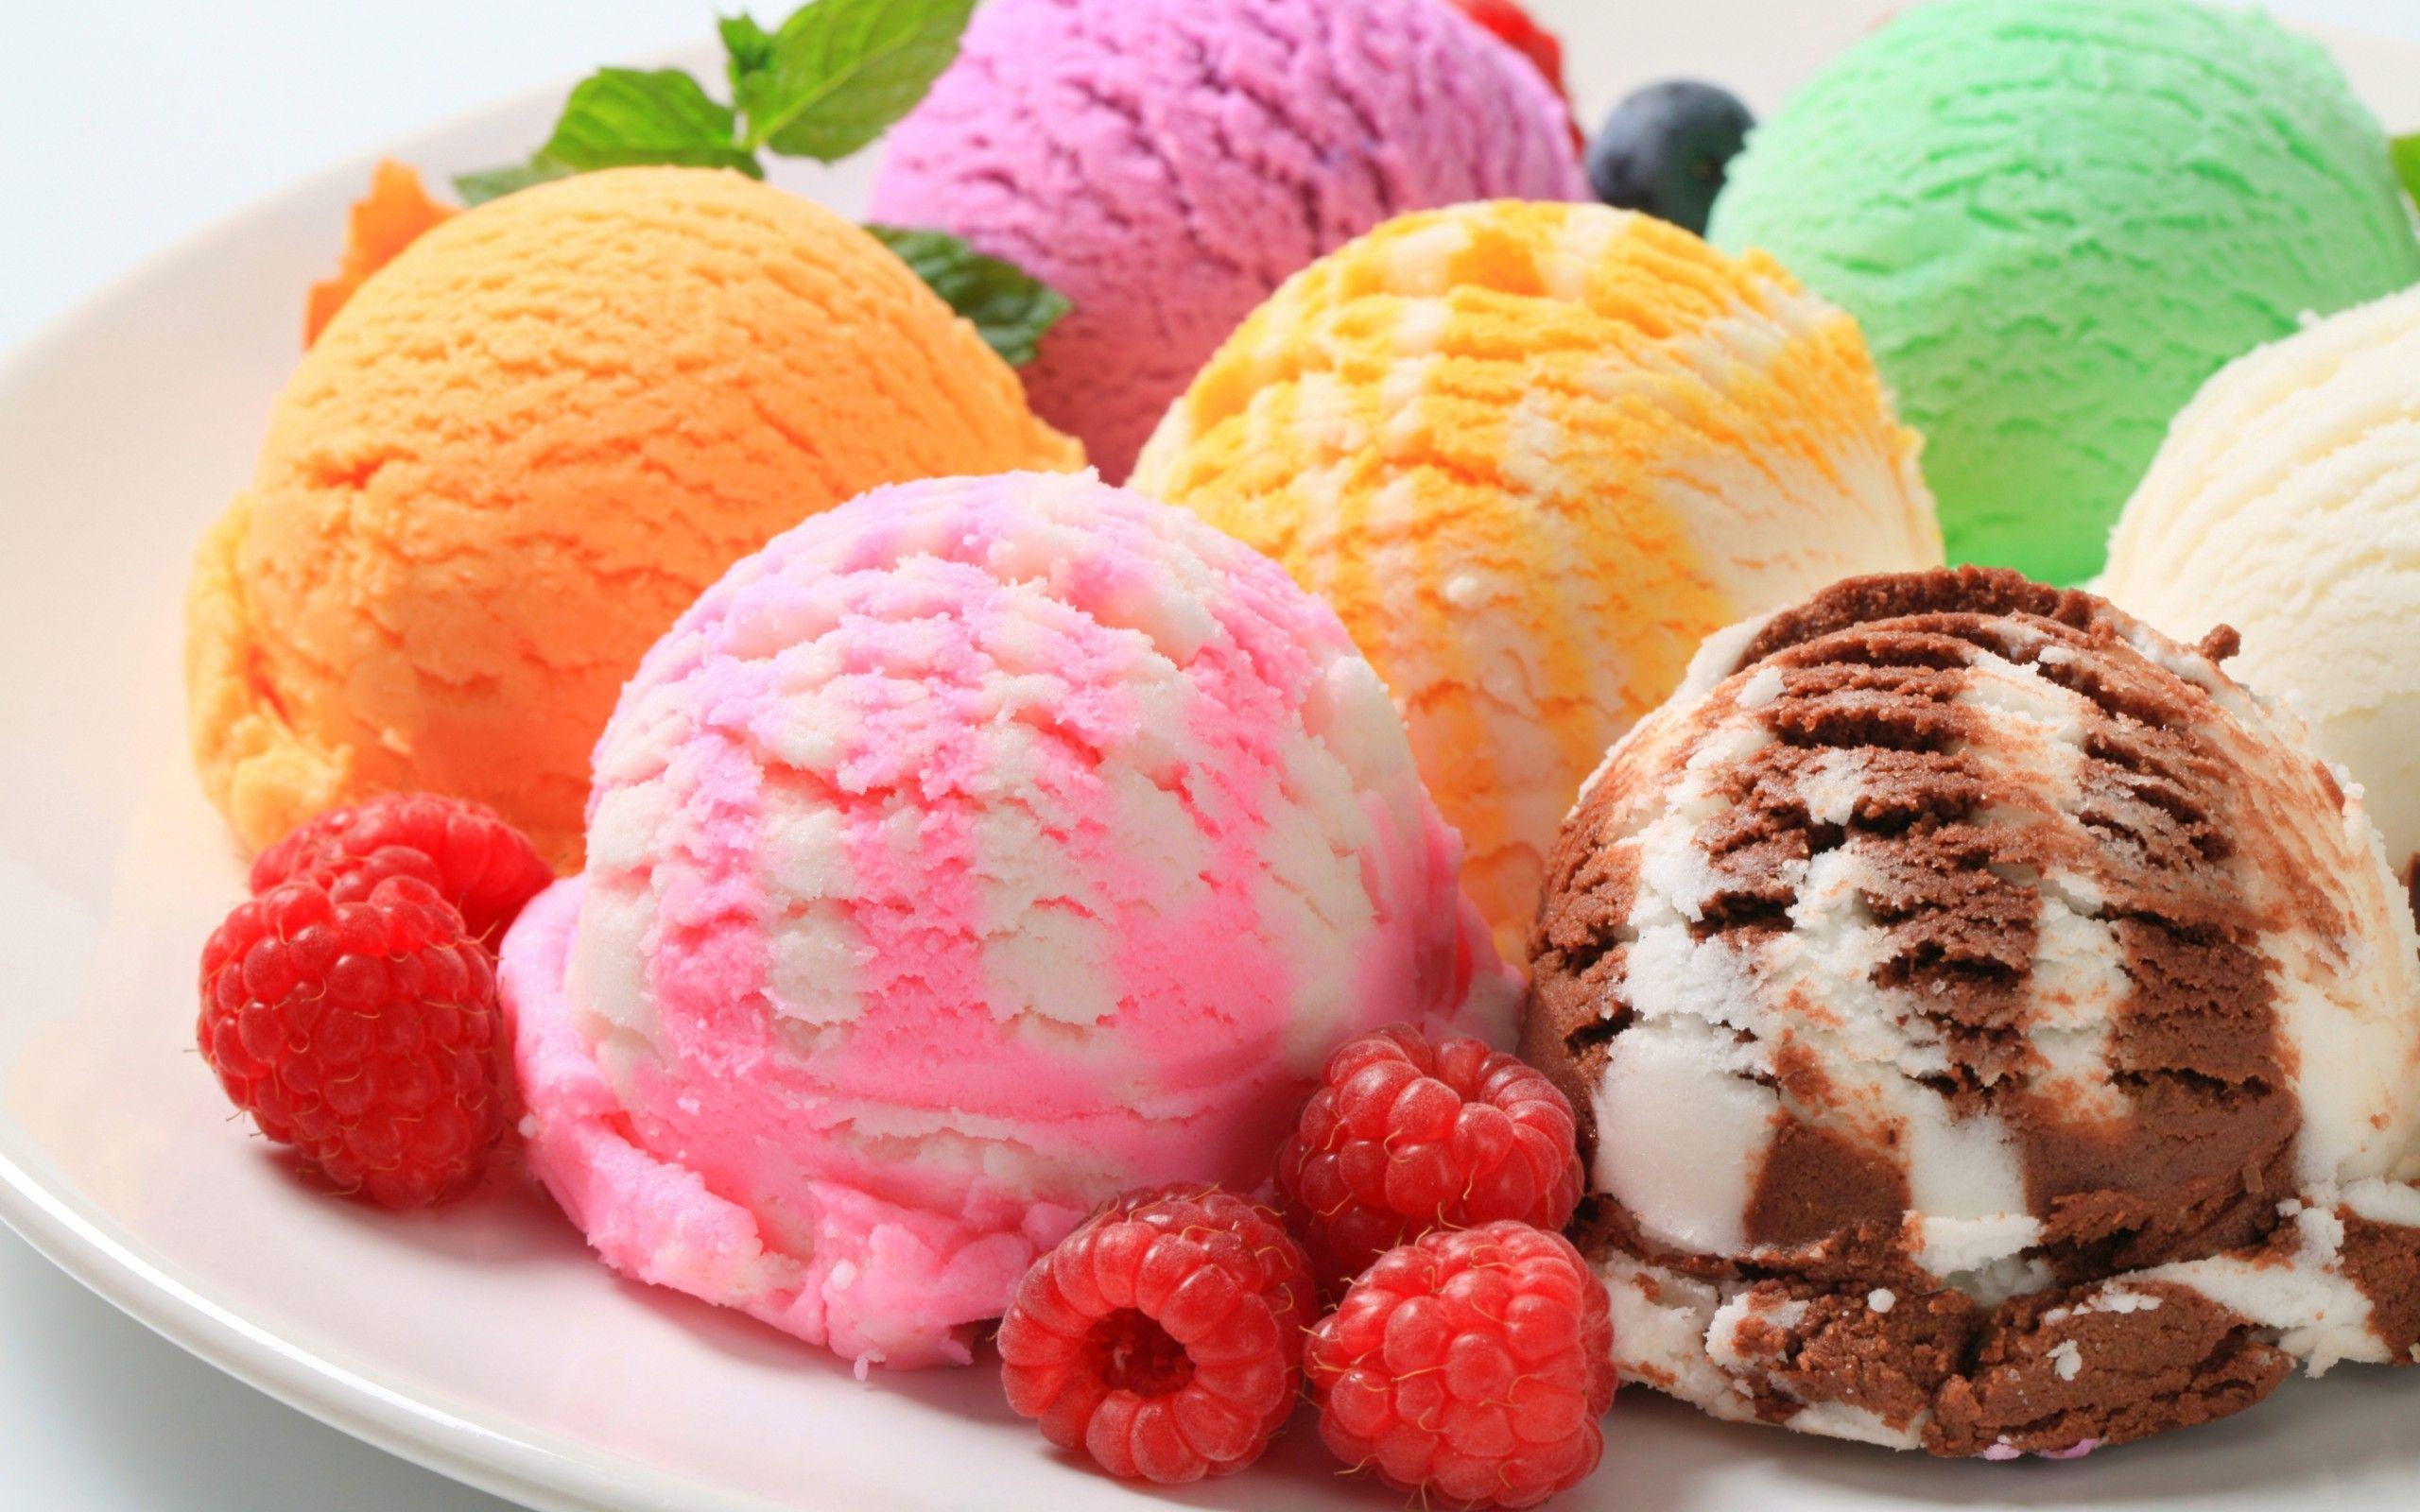 HD wallpaper ice cream 4k high quality images food and drink fruit bowl   Wallpaper Flare